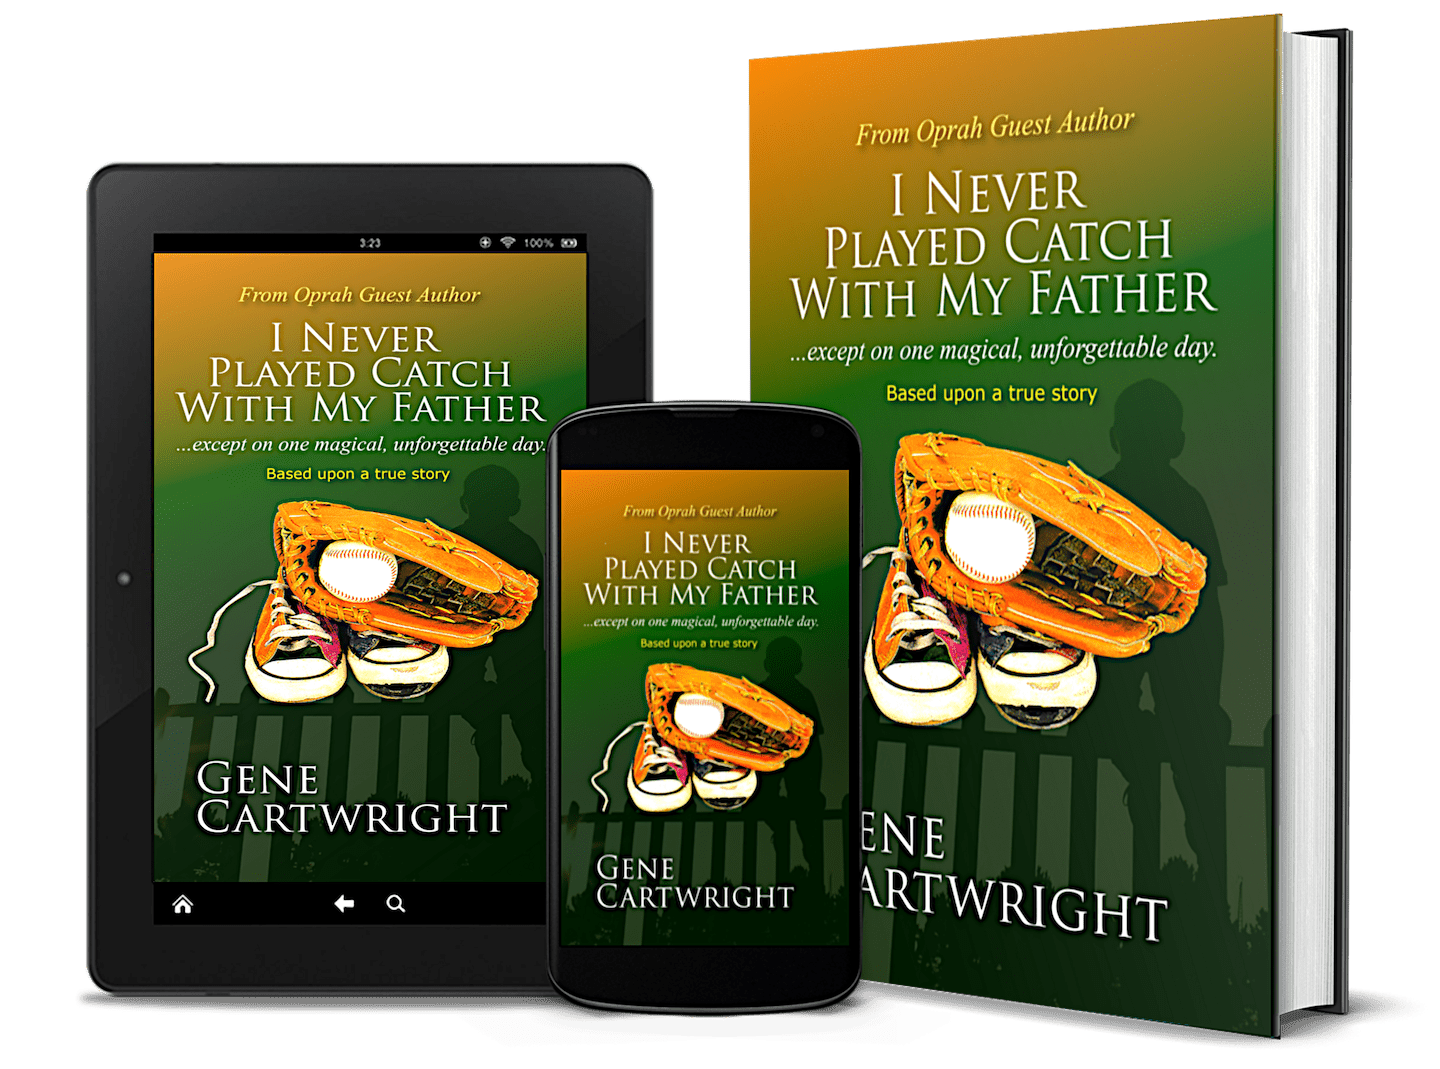 From former Oprah guest author, Gene Cartwright. Based upon a true story - family and baseball